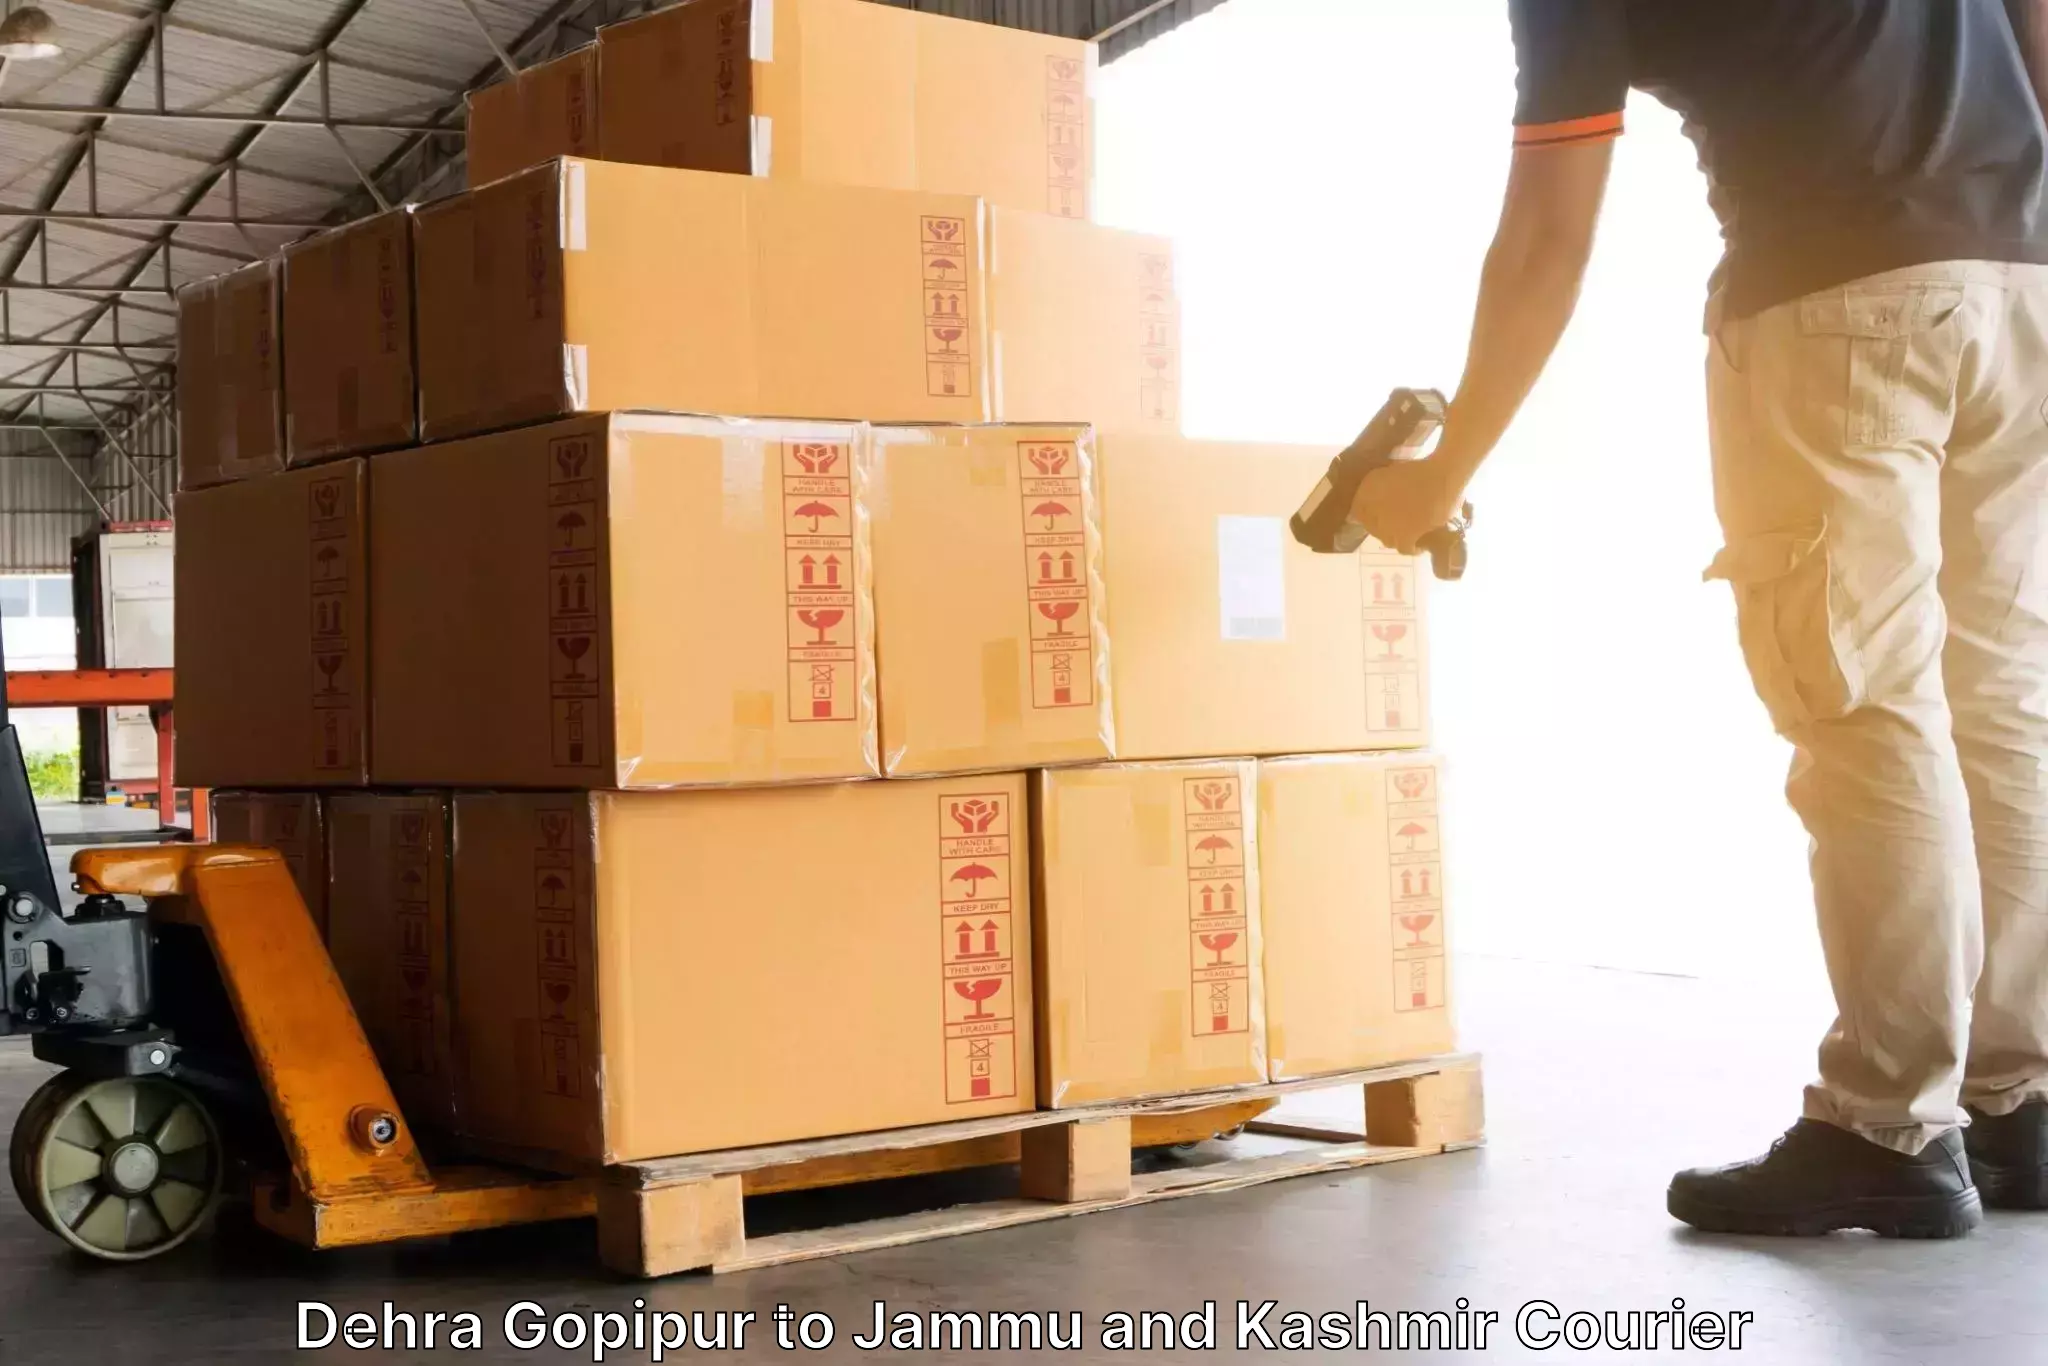 Seamless shipping experience Dehra Gopipur to Jammu and Kashmir